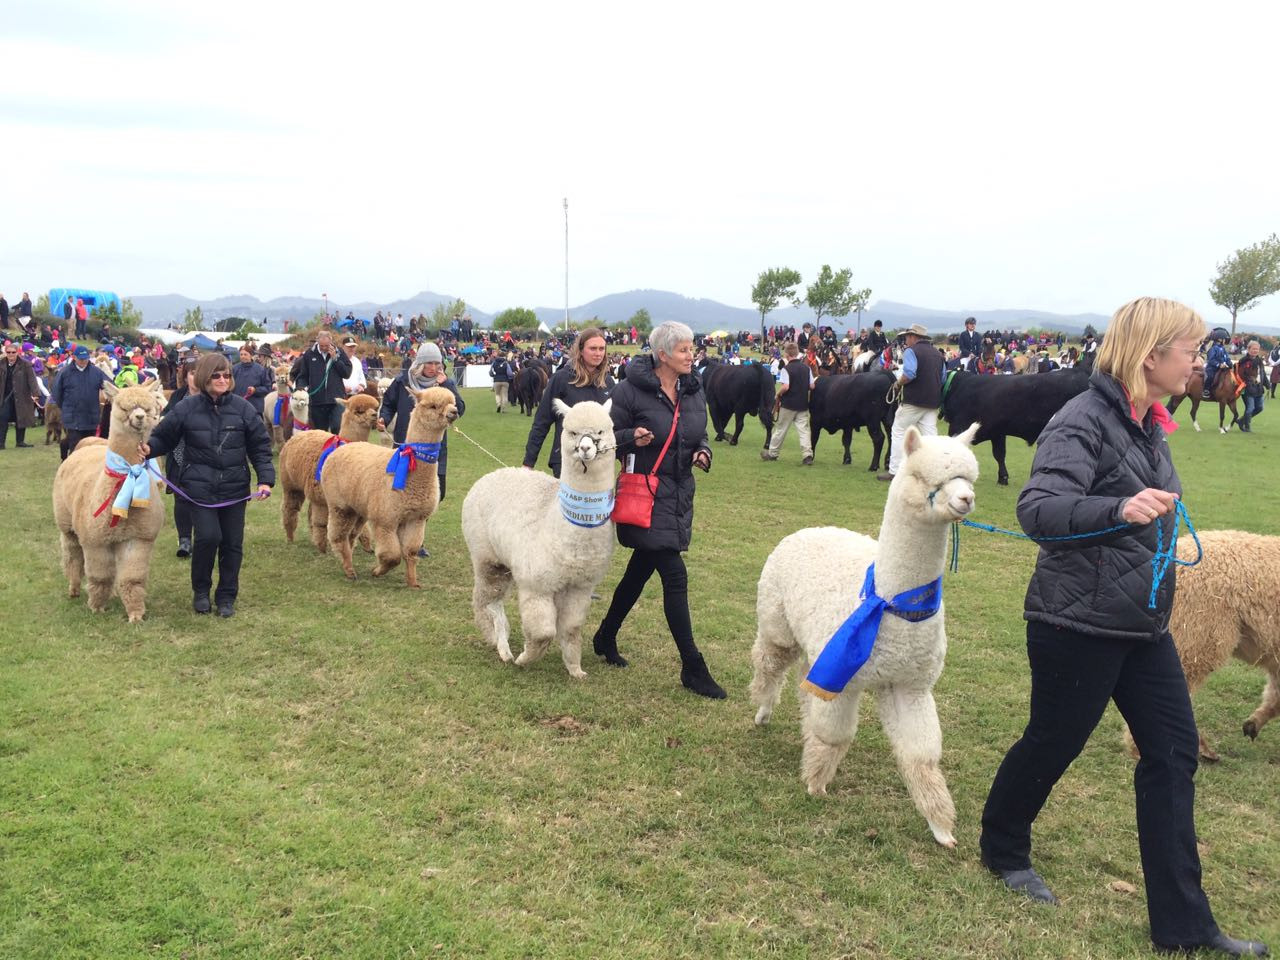  The Ballantynes Grand Parade was the final attraction of the event held on Friday, November 11. It was the showcase of the best of the best with prize winners across most livestock and equestrian sections parading their ribbons. The Parade is led by the Canterbury Caledonian Pipe Band. 